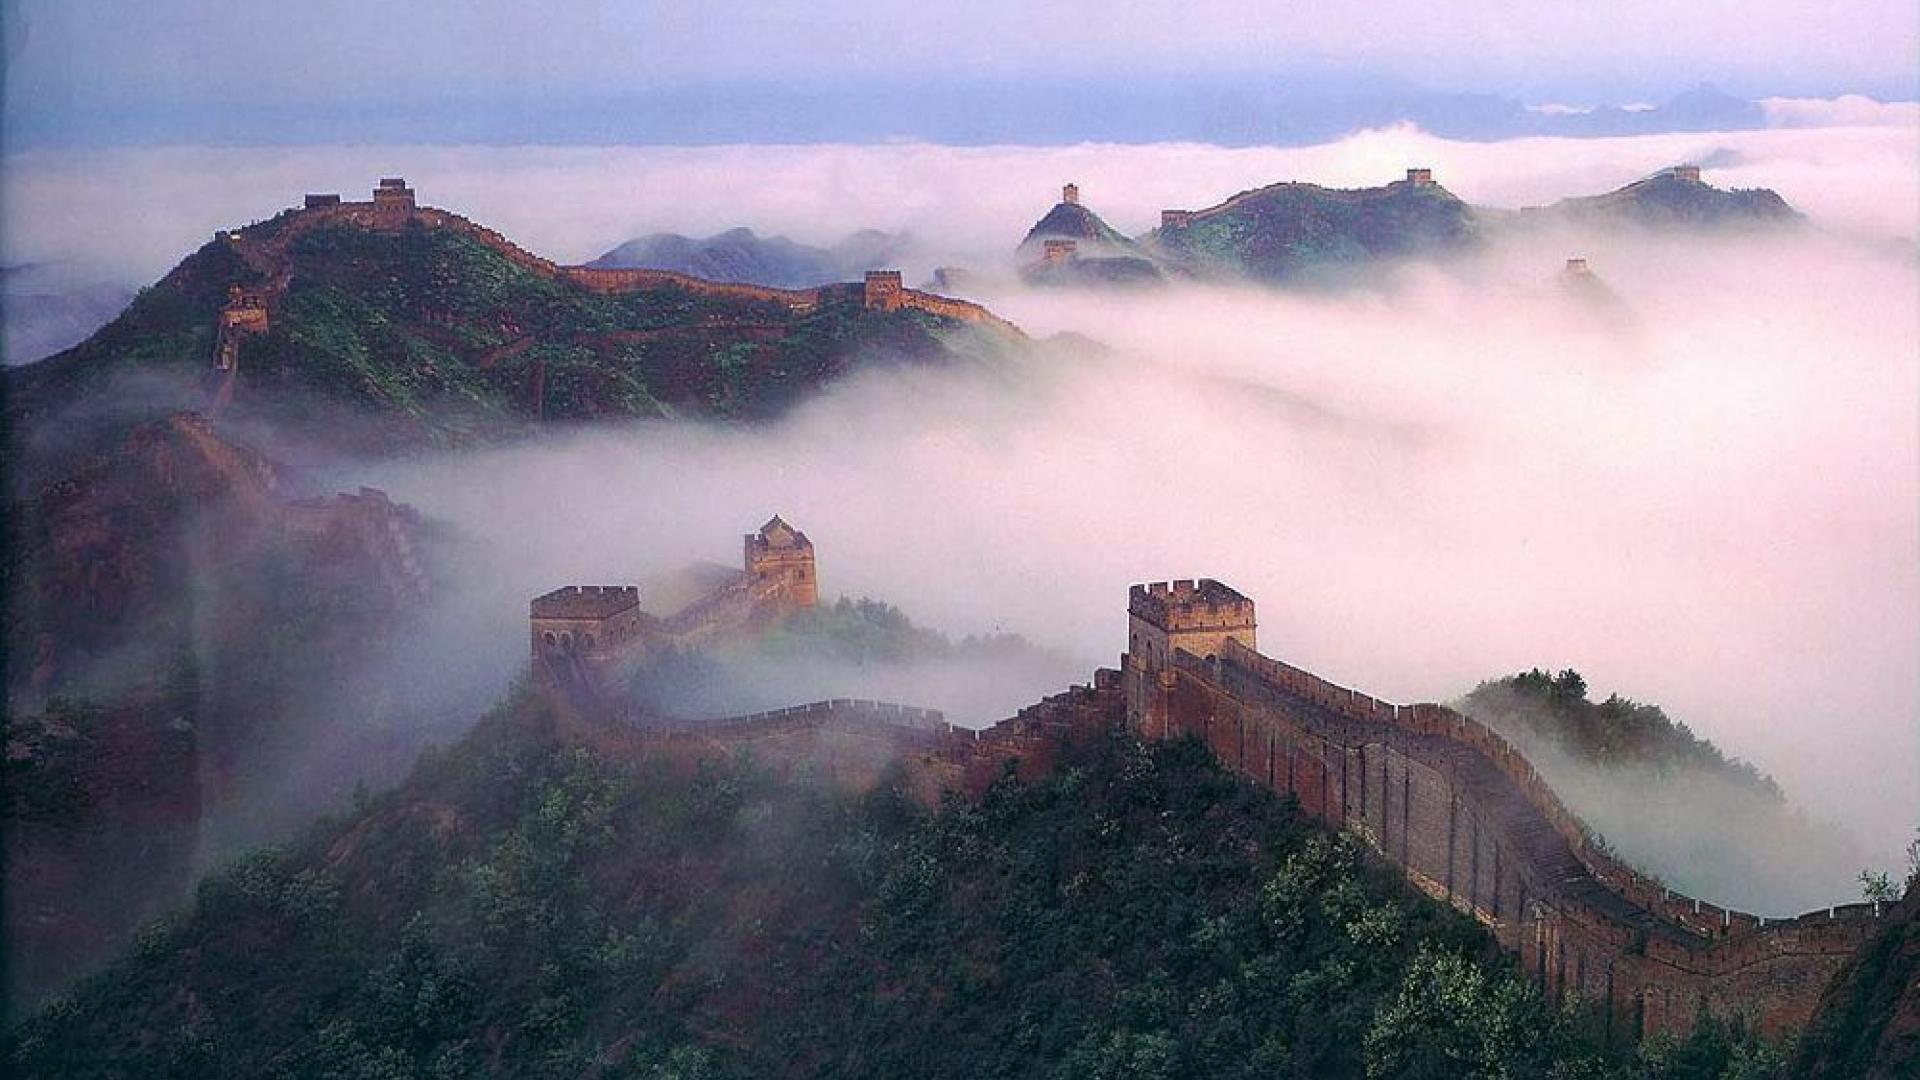 http://www.infiniteunknown.net/wp-content/uploads/2015/06/Chinese-Wall-in-the-Mist.jpg